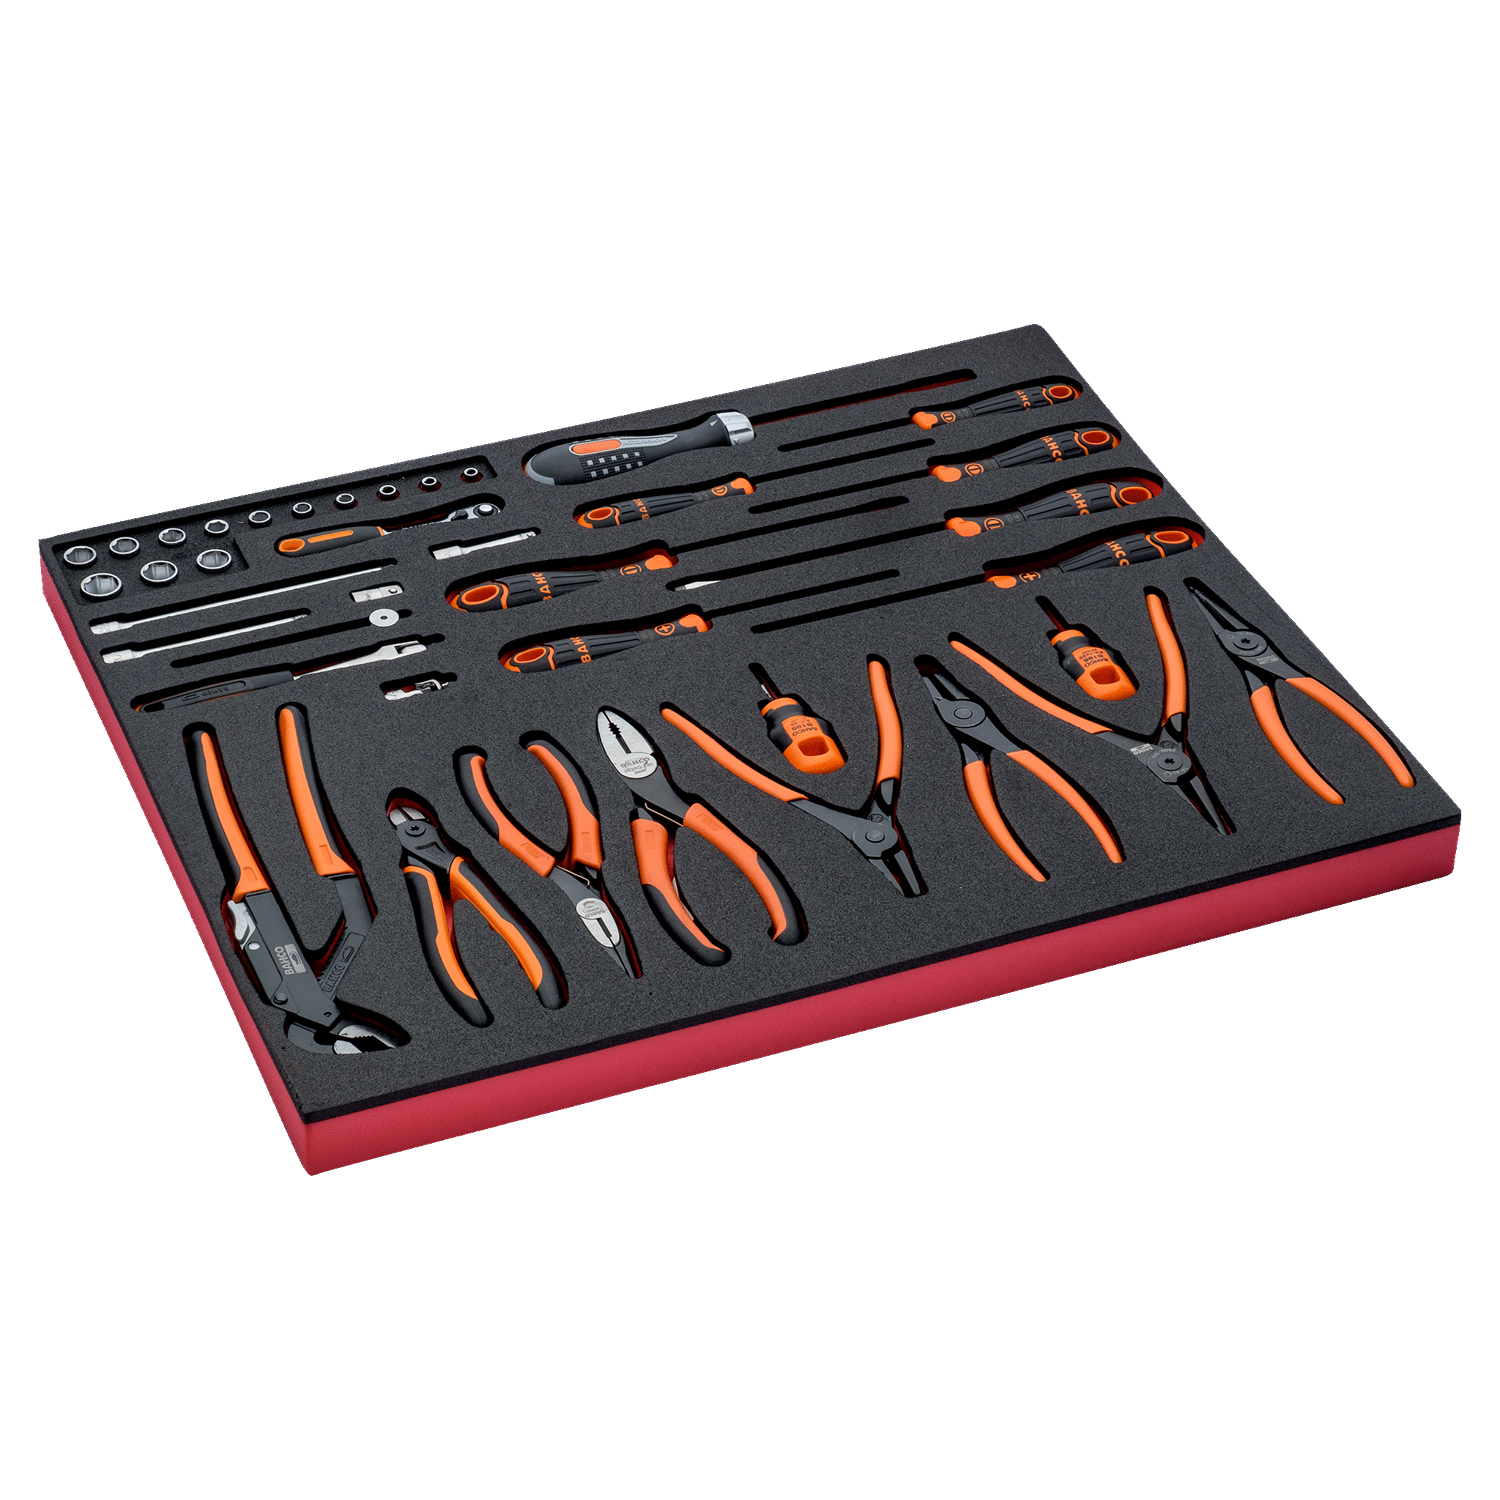 BAHCO FF1A136 Fit&Go 3/3 Foam Inlay 1/4” Pliers/Screwdriver Set - Premium Screwdriver Set from BAHCO - Shop now at Yew Aik.